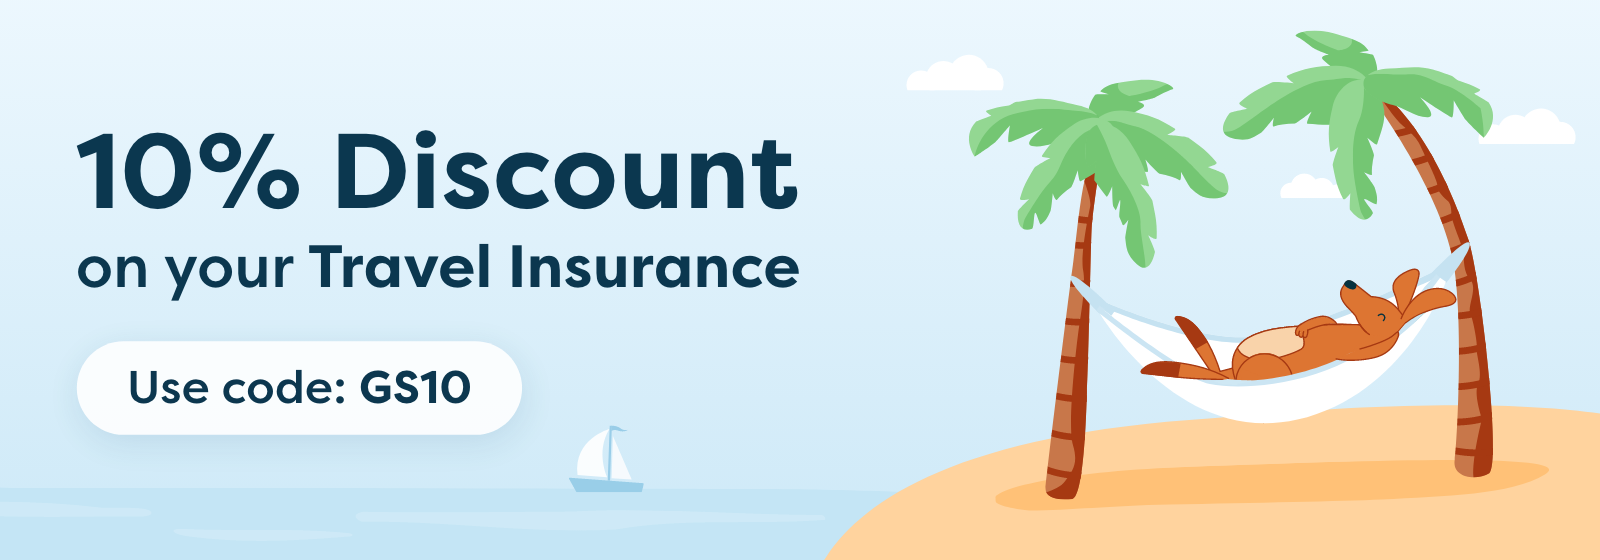 Use Code - GS10 for 10% discount on GoSkippy Travel Insurance